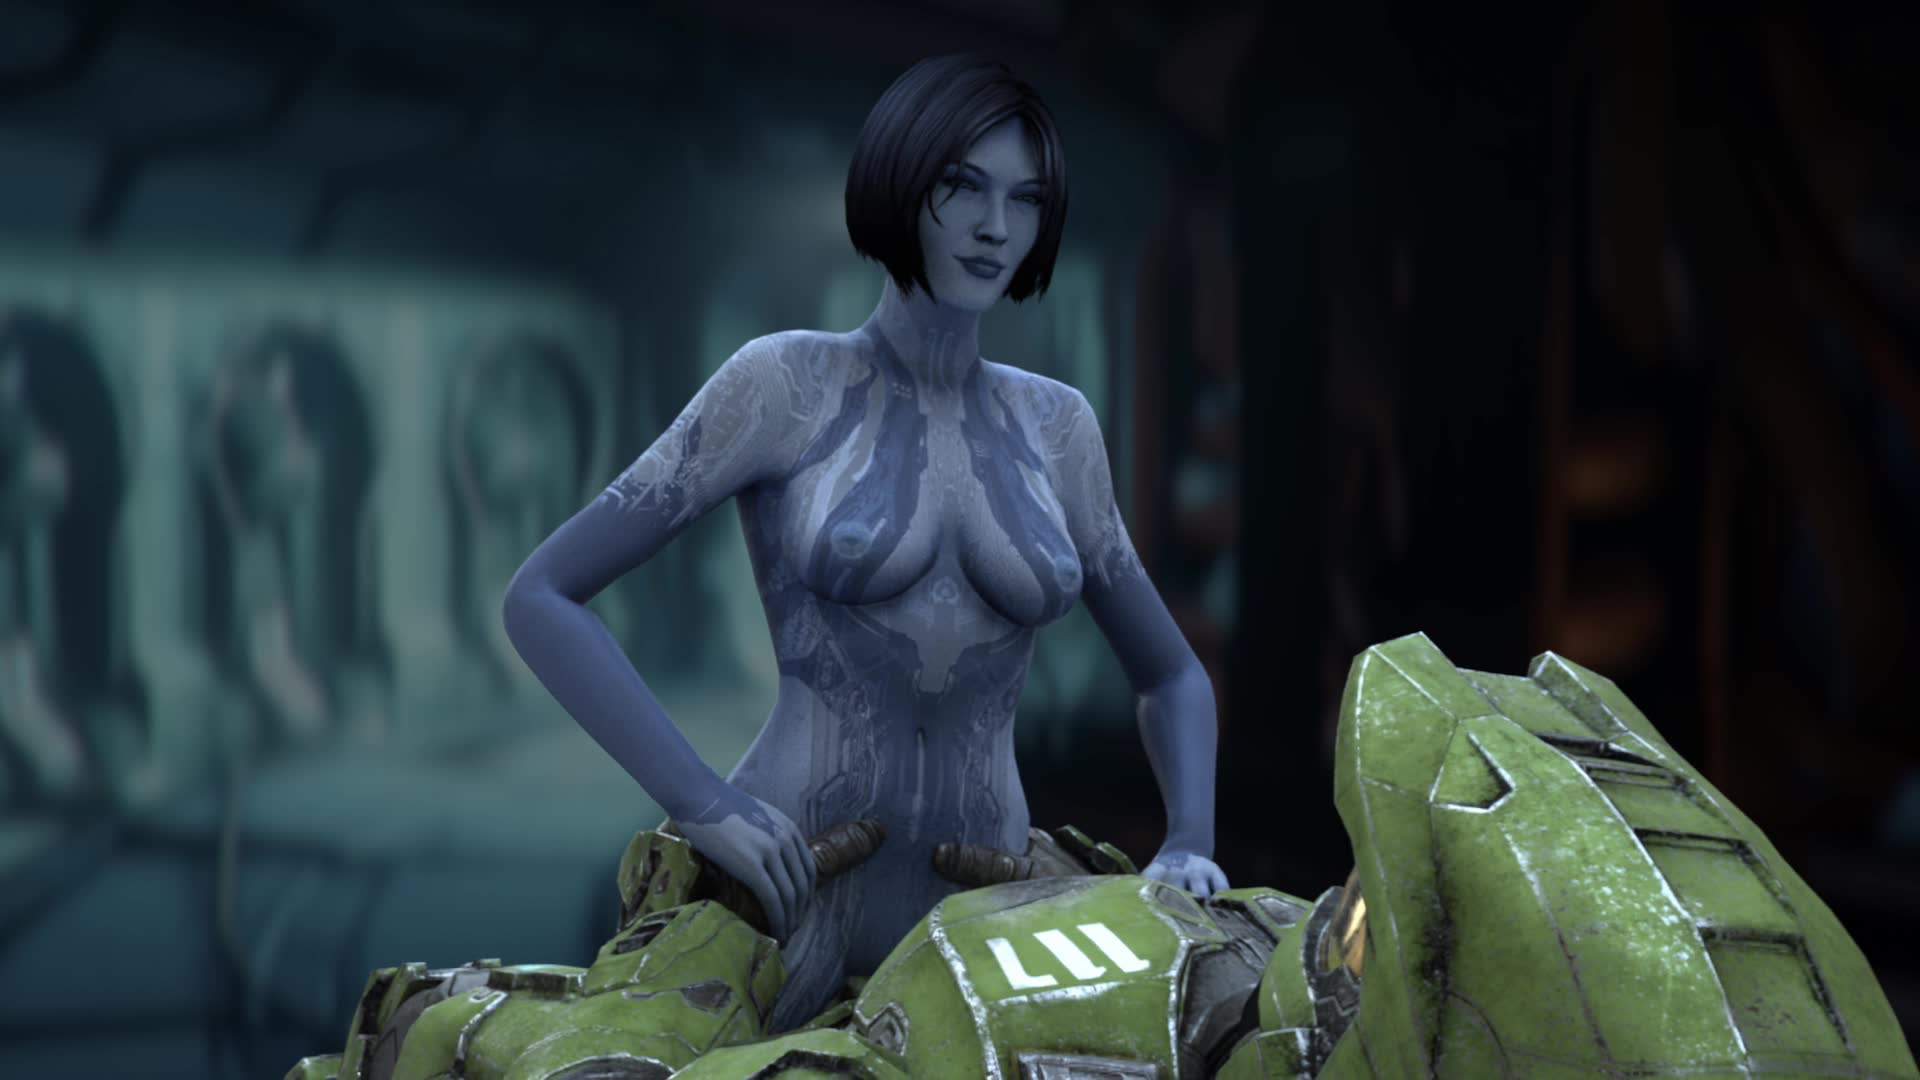 Cortana Rides Big Dick In Cowgirl Position – Halo NSFW animation thumbnail